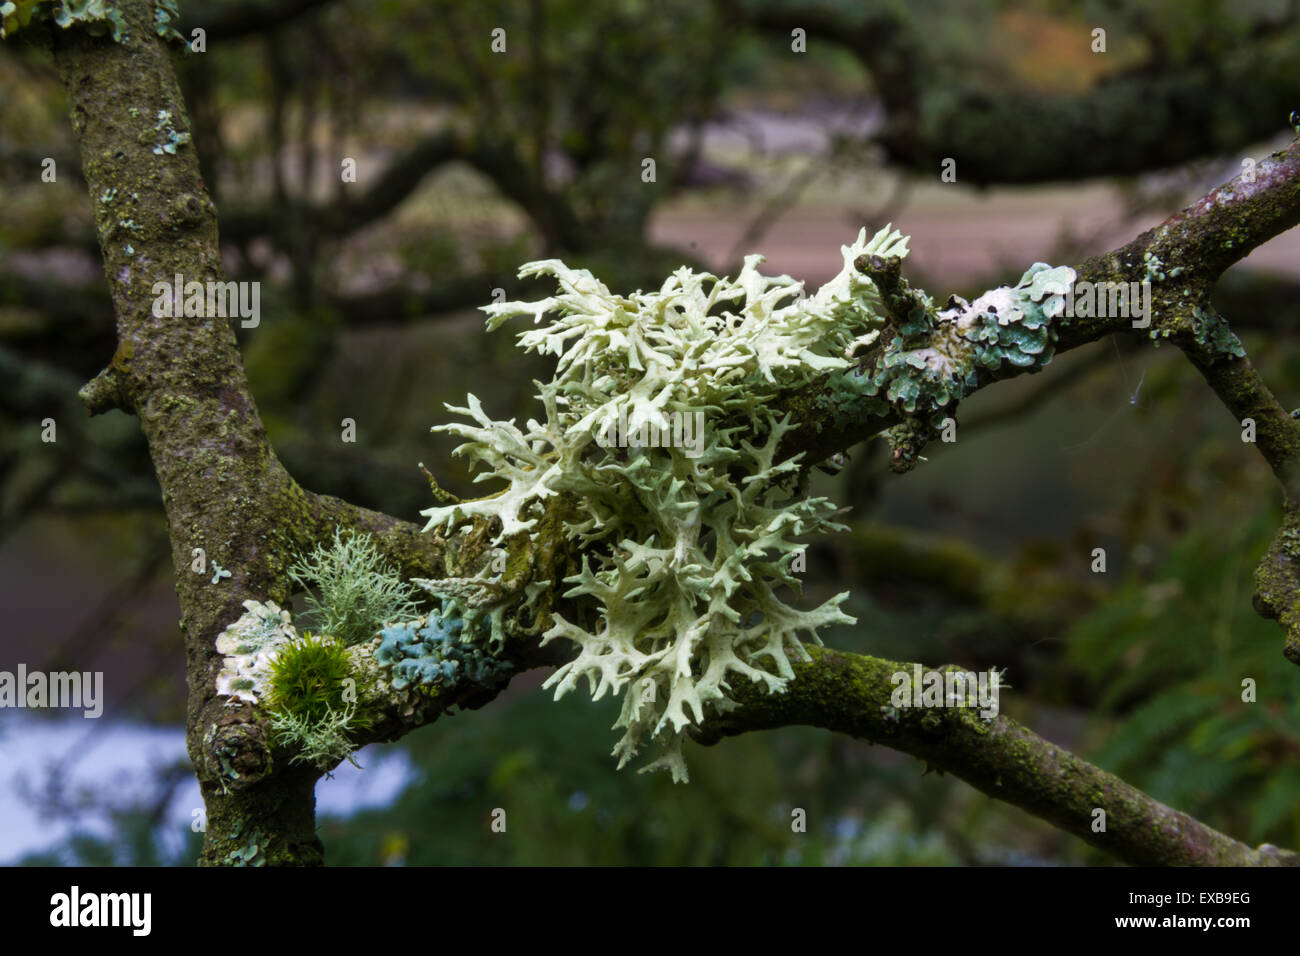 Lichen evernia prunastri, oakmoss, growing on branch, United Kingdom. Used if French perfume industry. Stock Photo